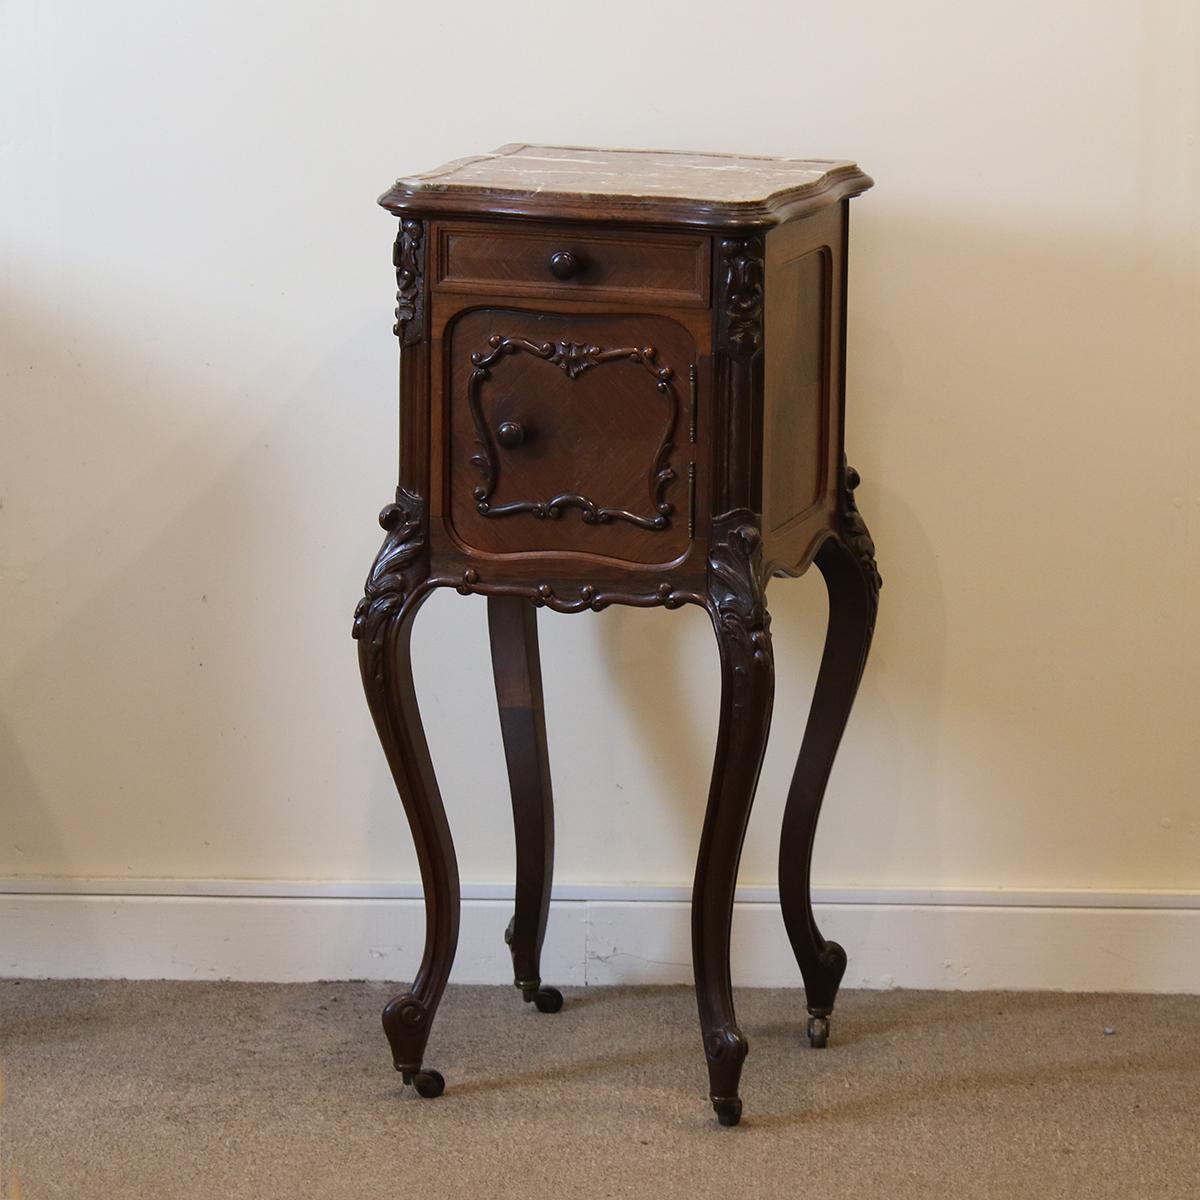 A pair of similar Louis XV style bedside tables.

These are almost a matching pair, having very similar heights, patina of wood and marble tops and will stand very nicely together.